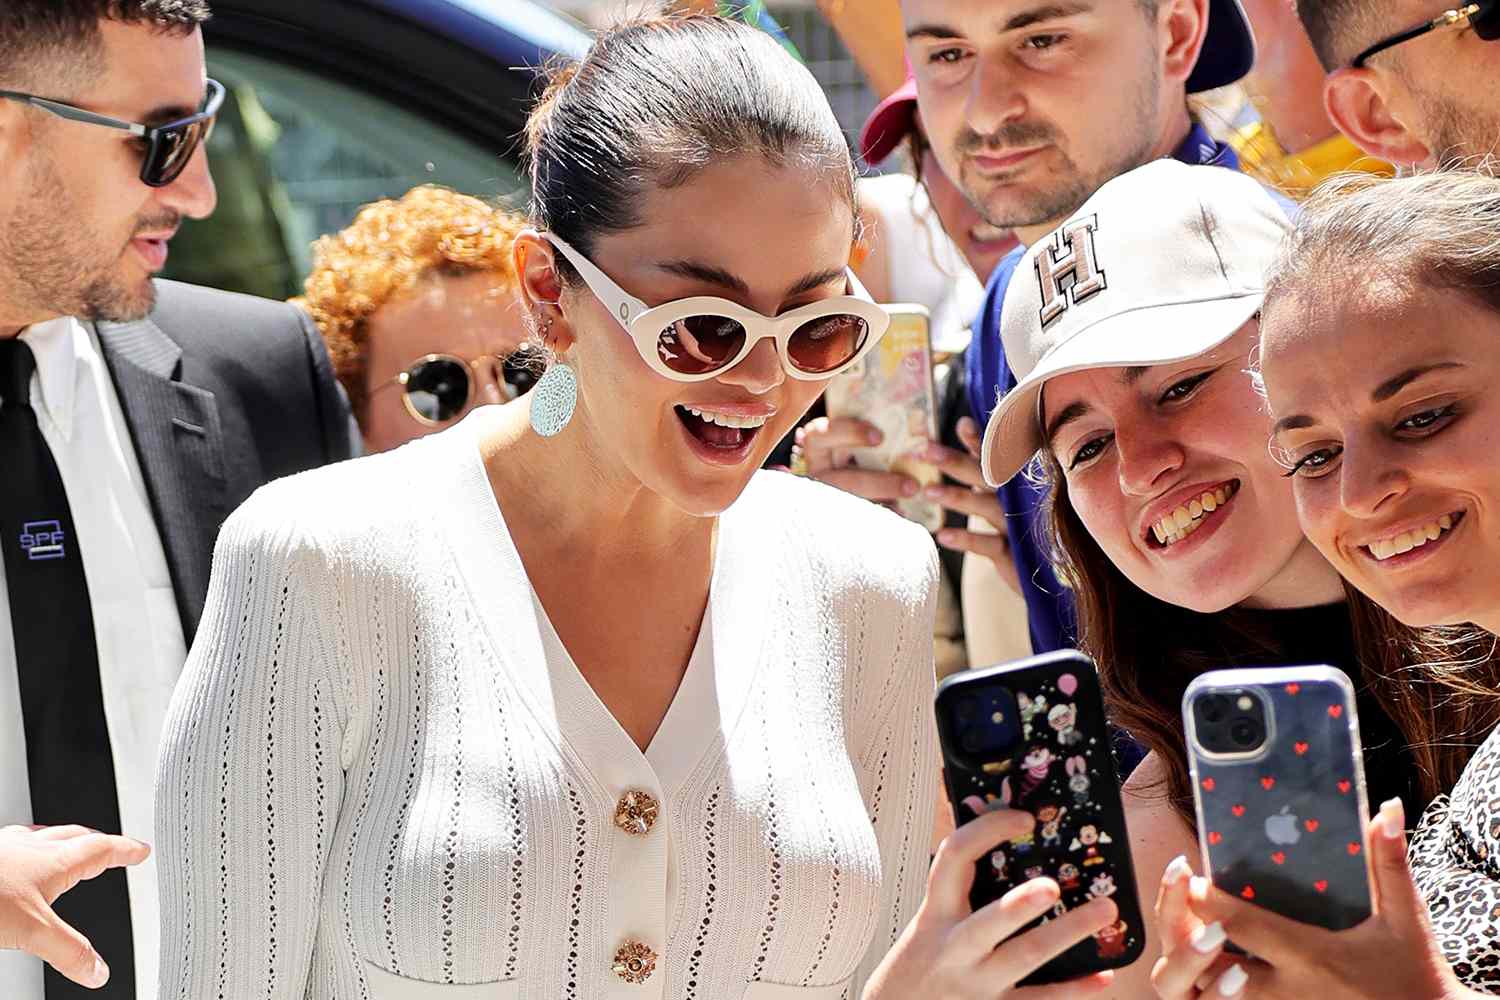 Selena Gomez Kicks Off Cannes in a Flirty, $495 Dress: All About Her Chic Look!